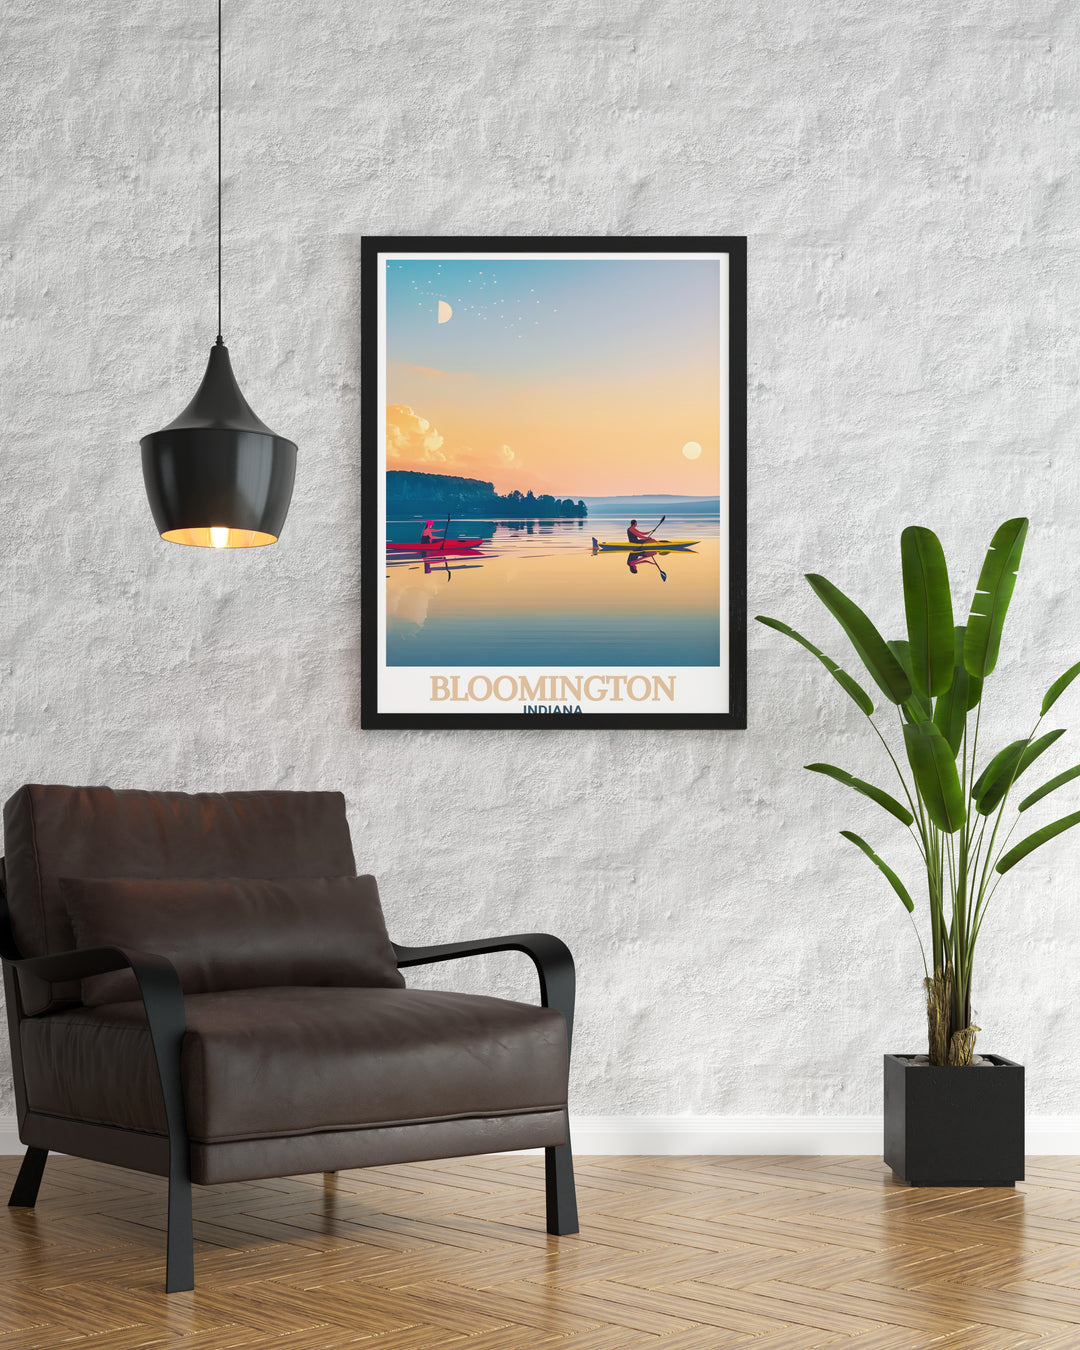 Lake Monroe travel poster featuring the stunning scenery of Bloomington Indiana ideal for anyone who loves nature and wants to bring a piece of Bloomington into their home with high quality prints that enhance any space